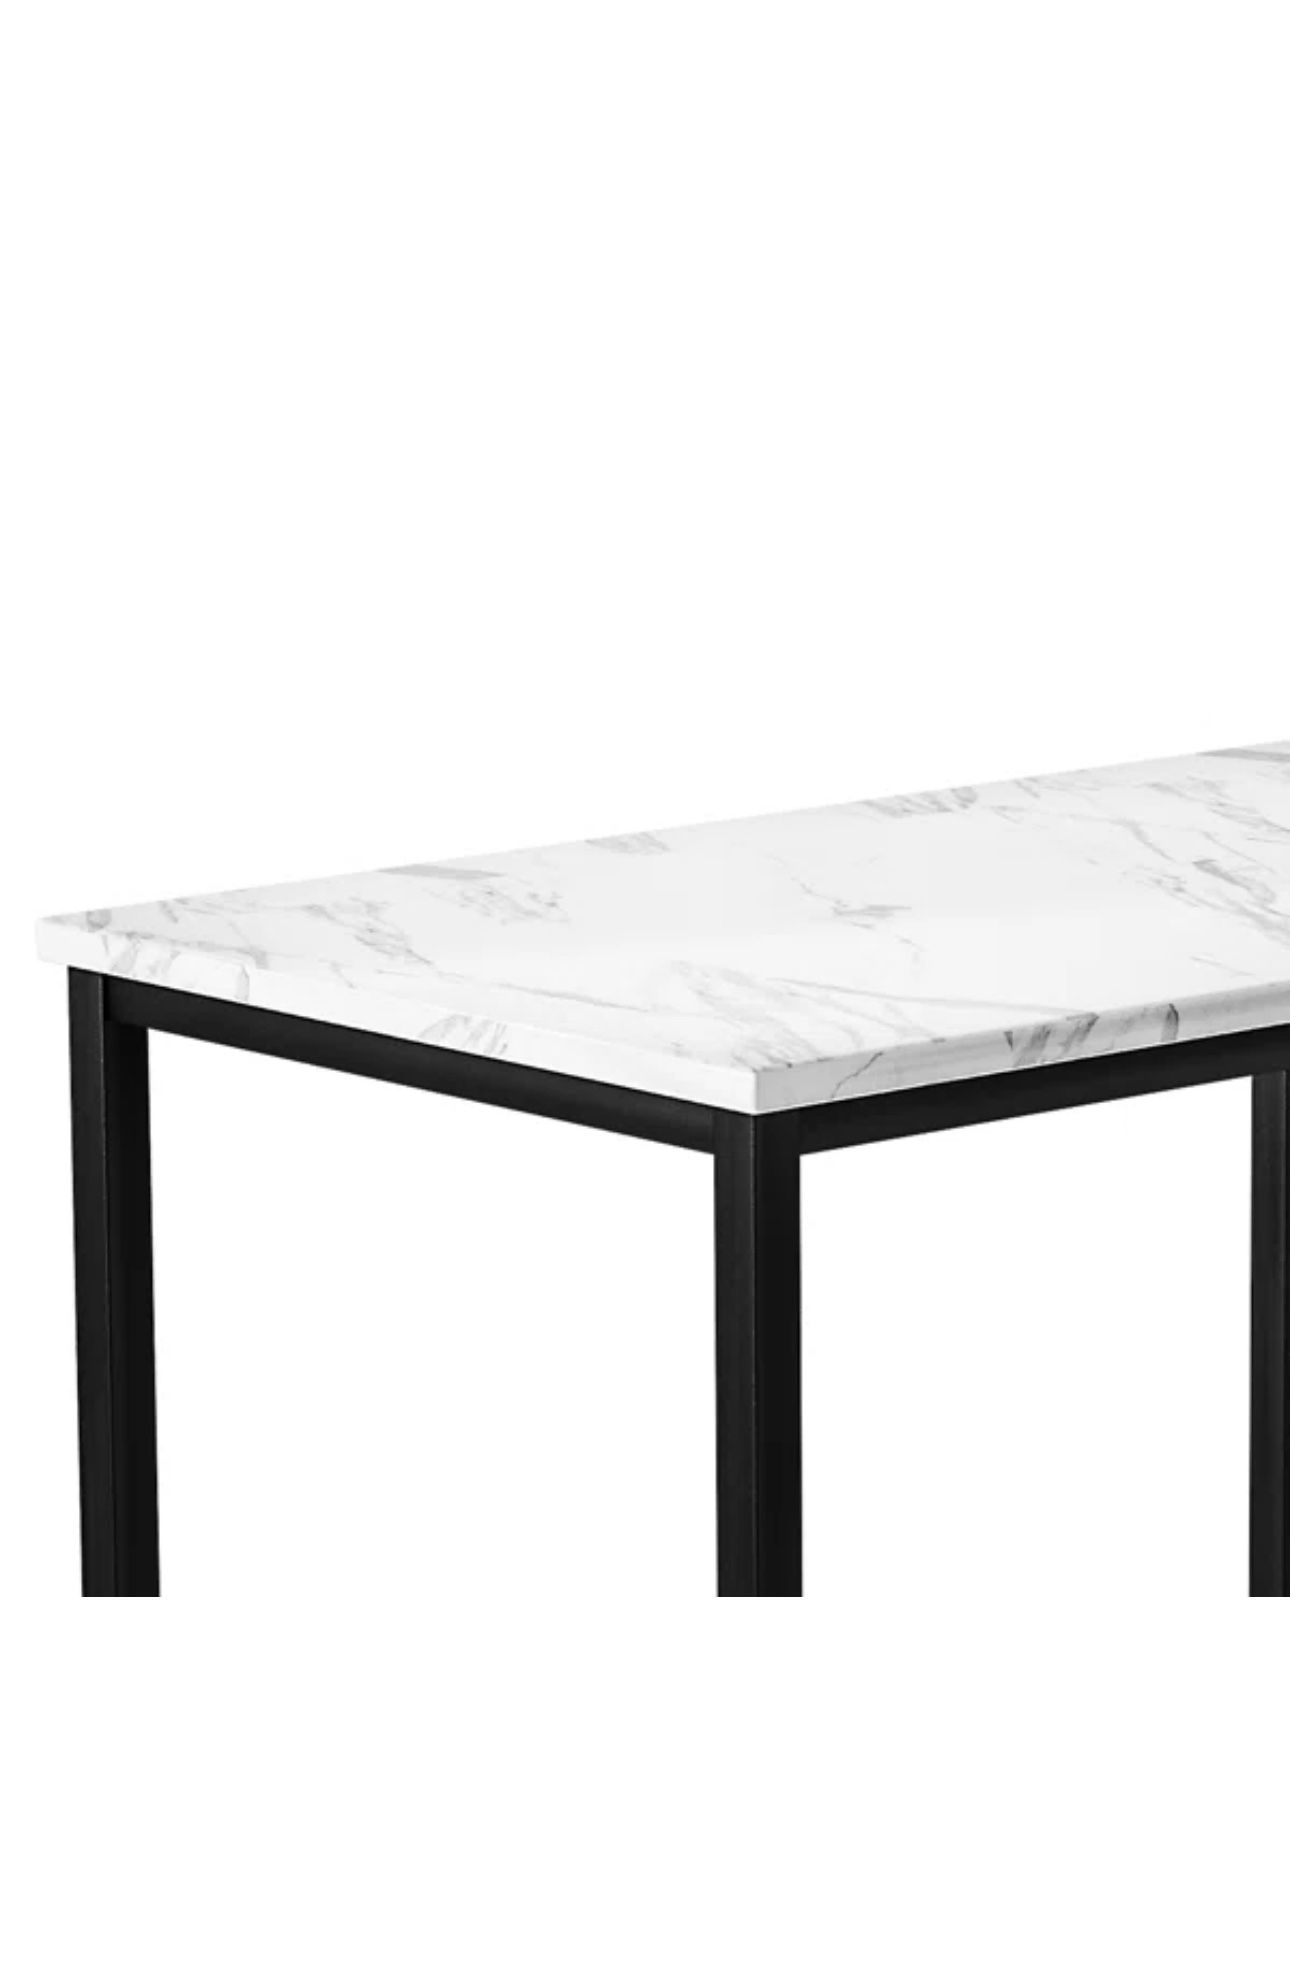 White Dinning Room Table (Chairs Not Included) 